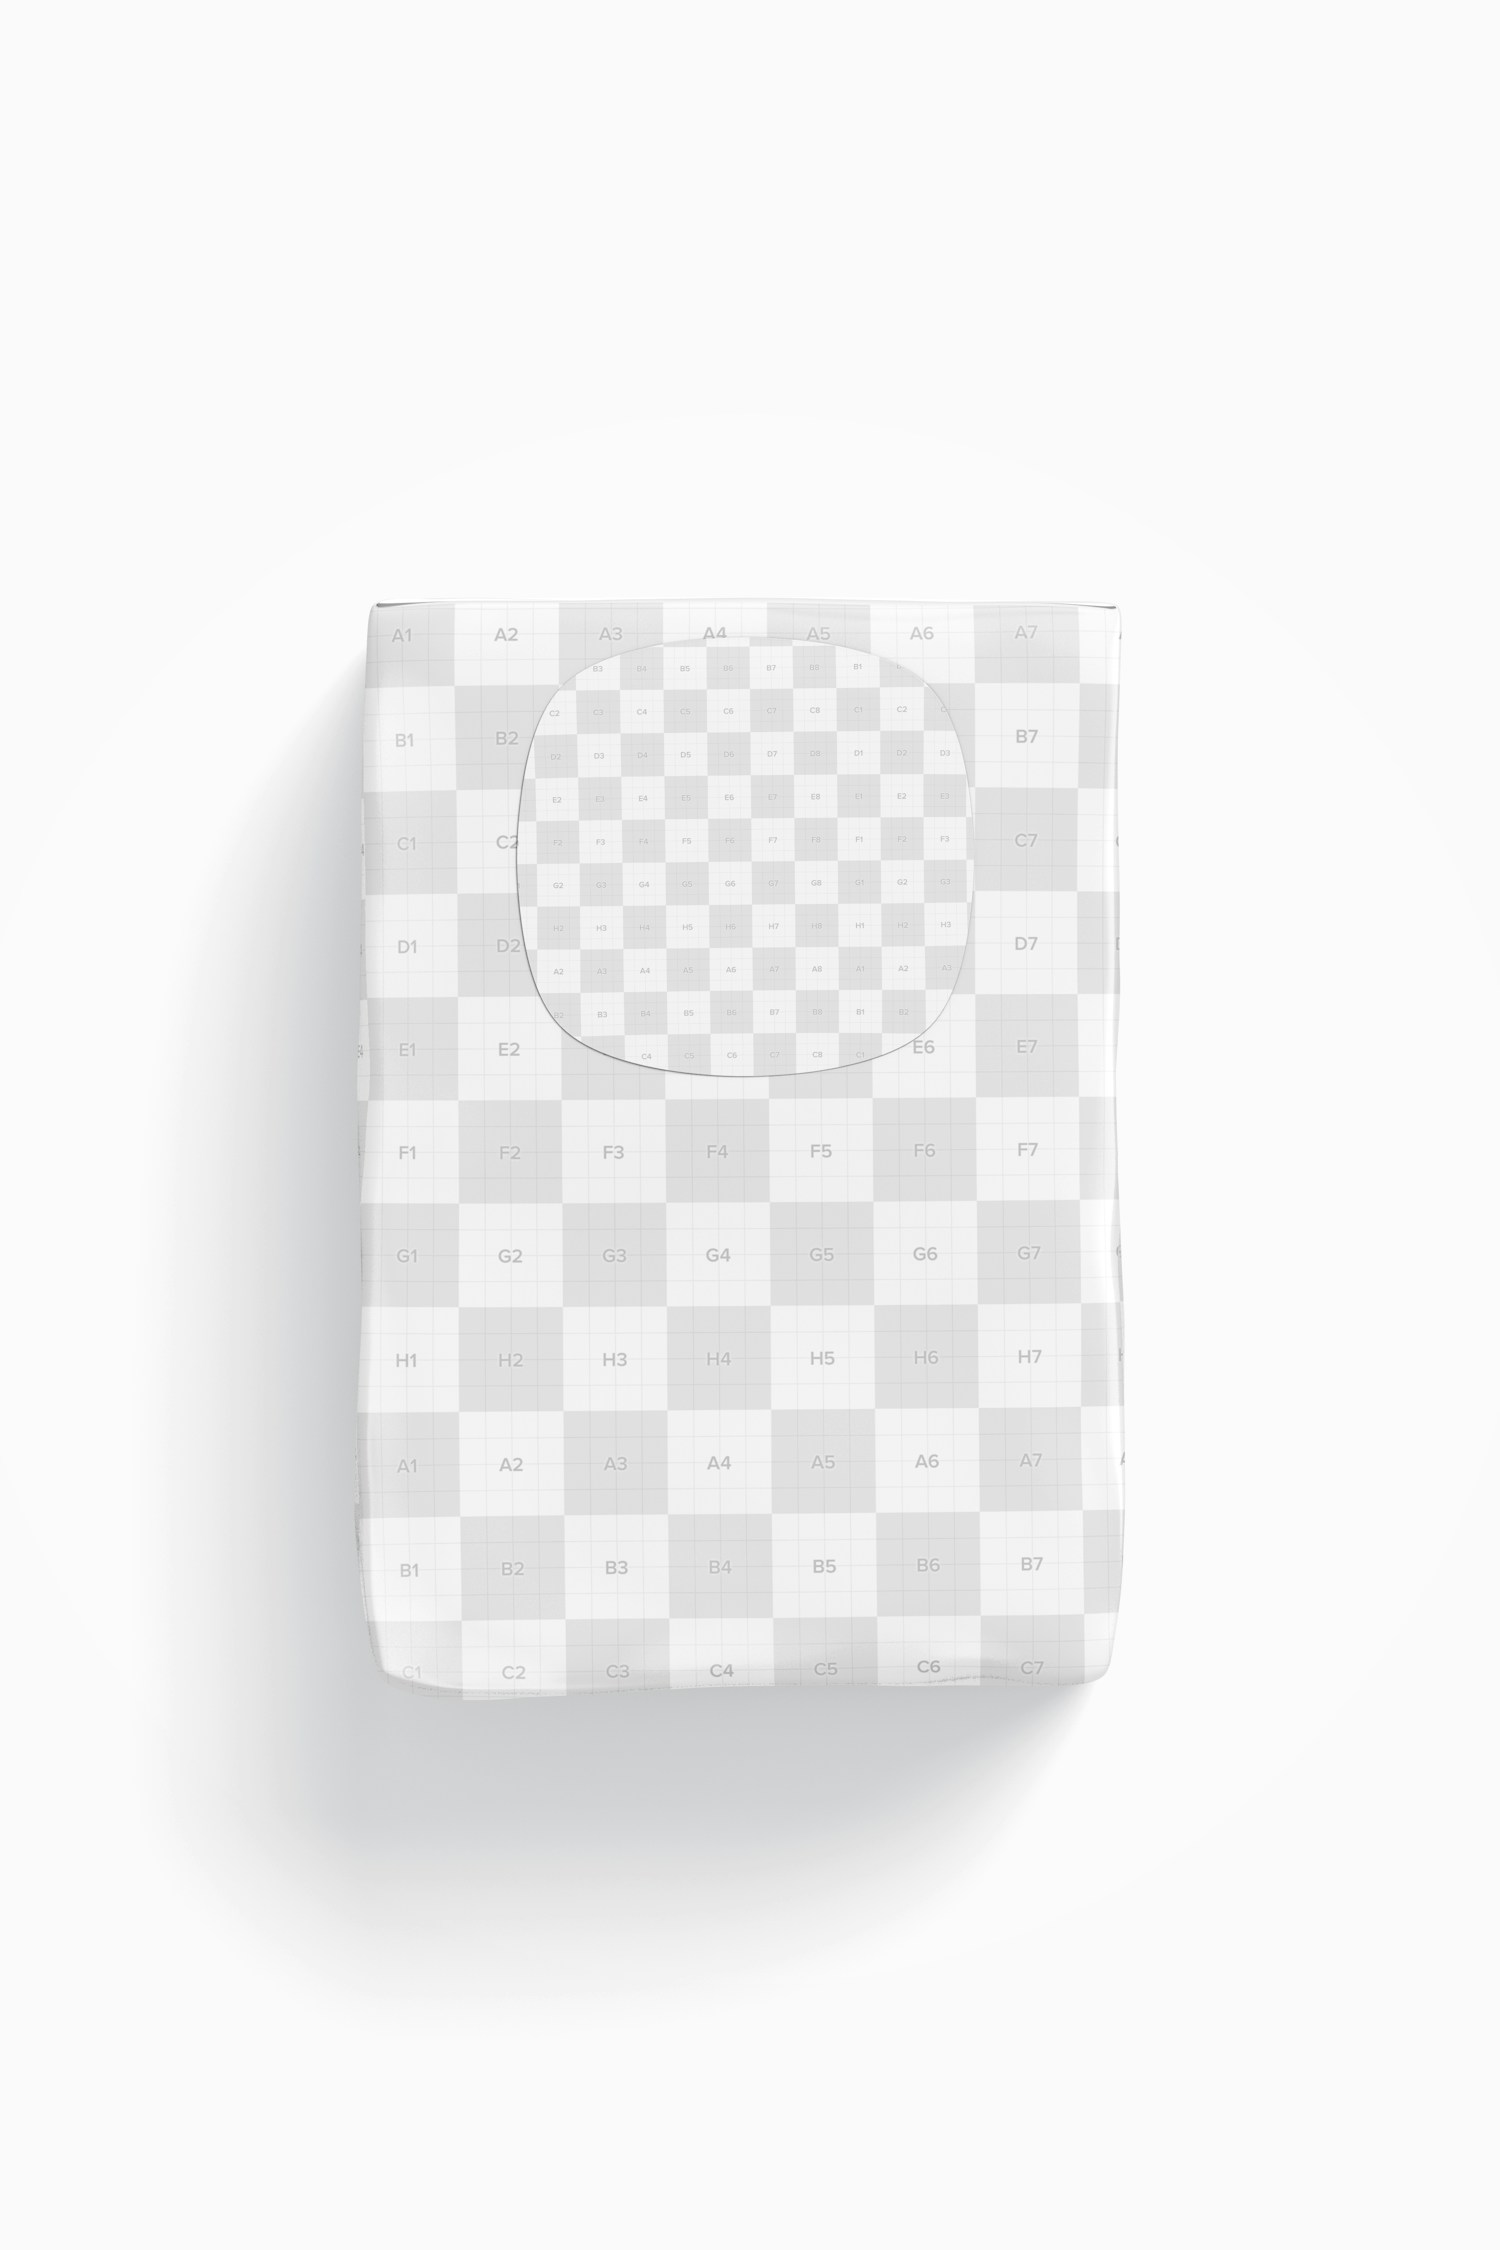 Small Tissue Packet Mockup, Top View